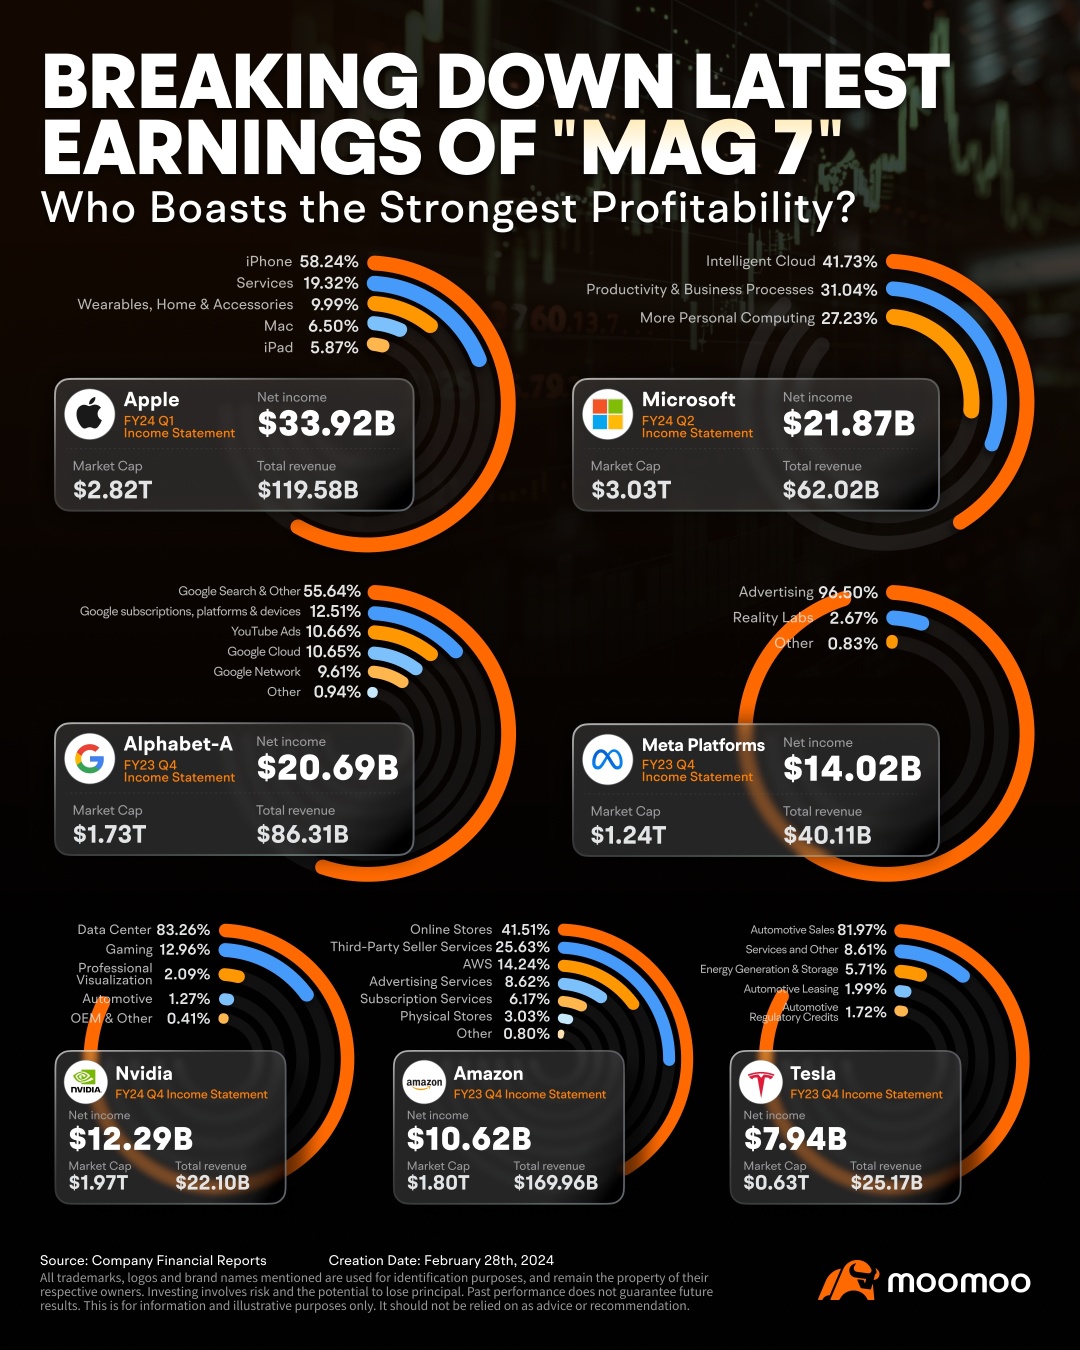 "Mag 7" is Now Worth More Than All Major Stock Markets Except the US: Who Among Them Boasts the Strongest Profitability?